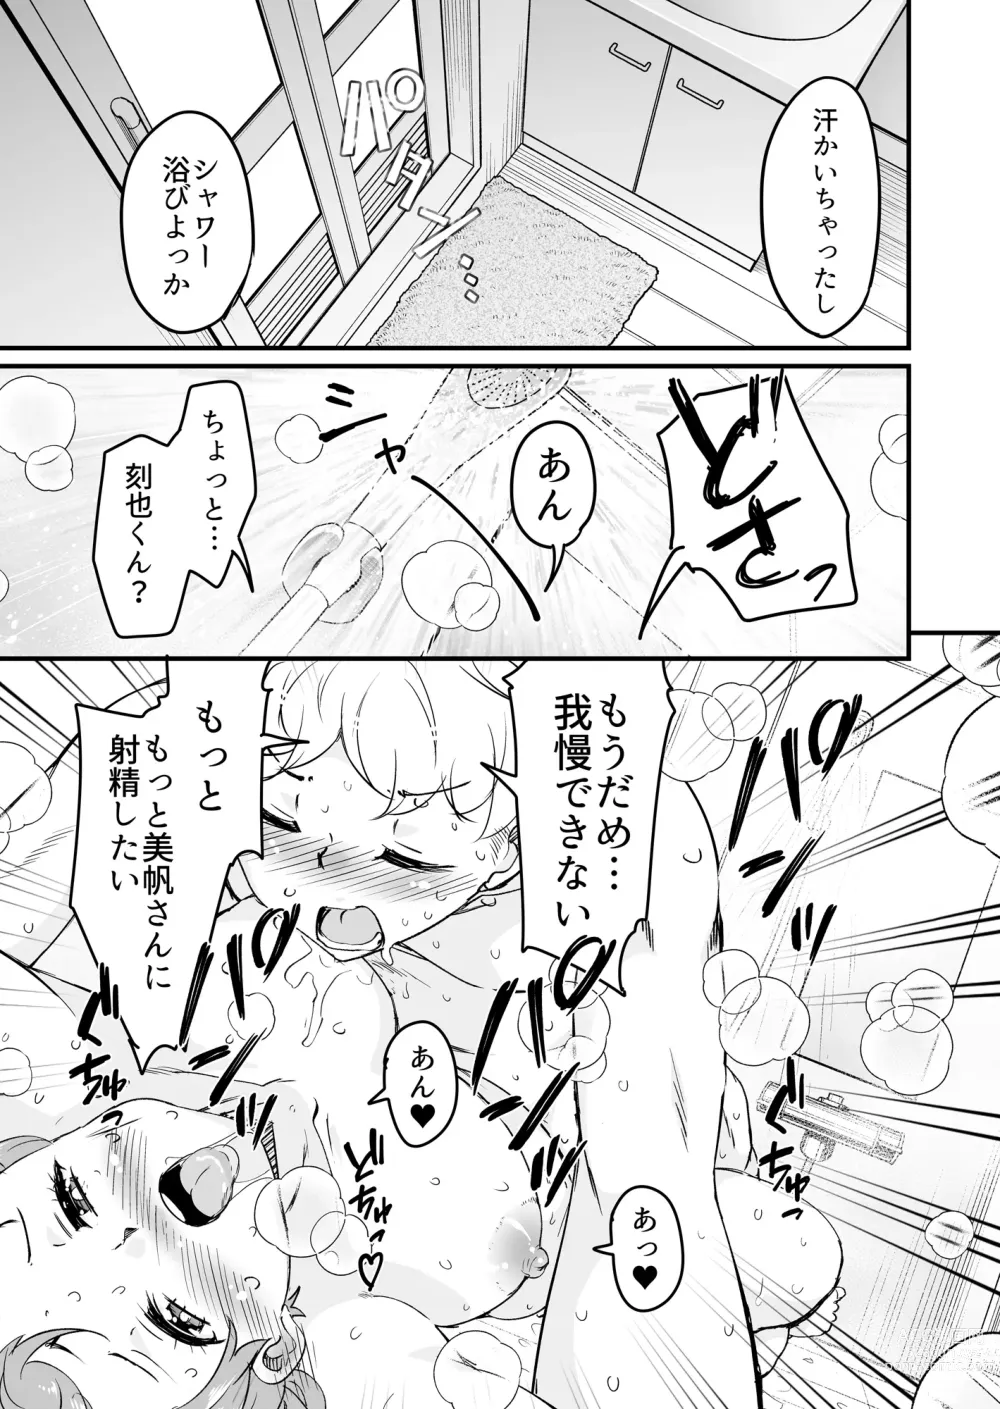 Page 25 of doujinshi 人妻店長〜娘の彼氏お借りします〜